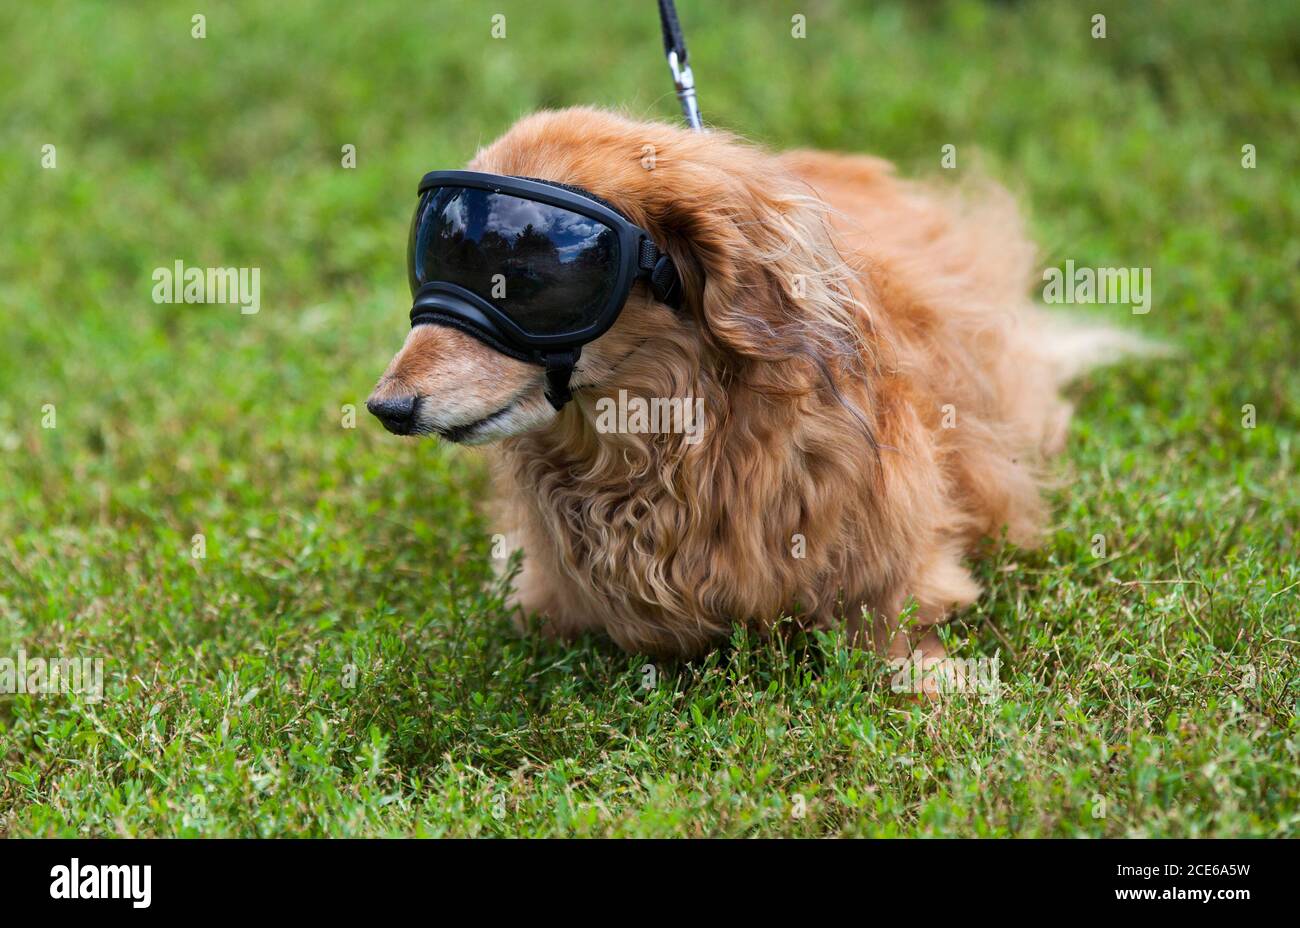 Beijing, Canada. 30th Aug, 2020. A pet dog wearing goggles poses for photos during the 2020 Party 4 Paws event in a park in Toronto, Canada, on Aug. 30, 2020. Credit: Zou Zheng/Xinhua/Alamy Live News Stock Photo